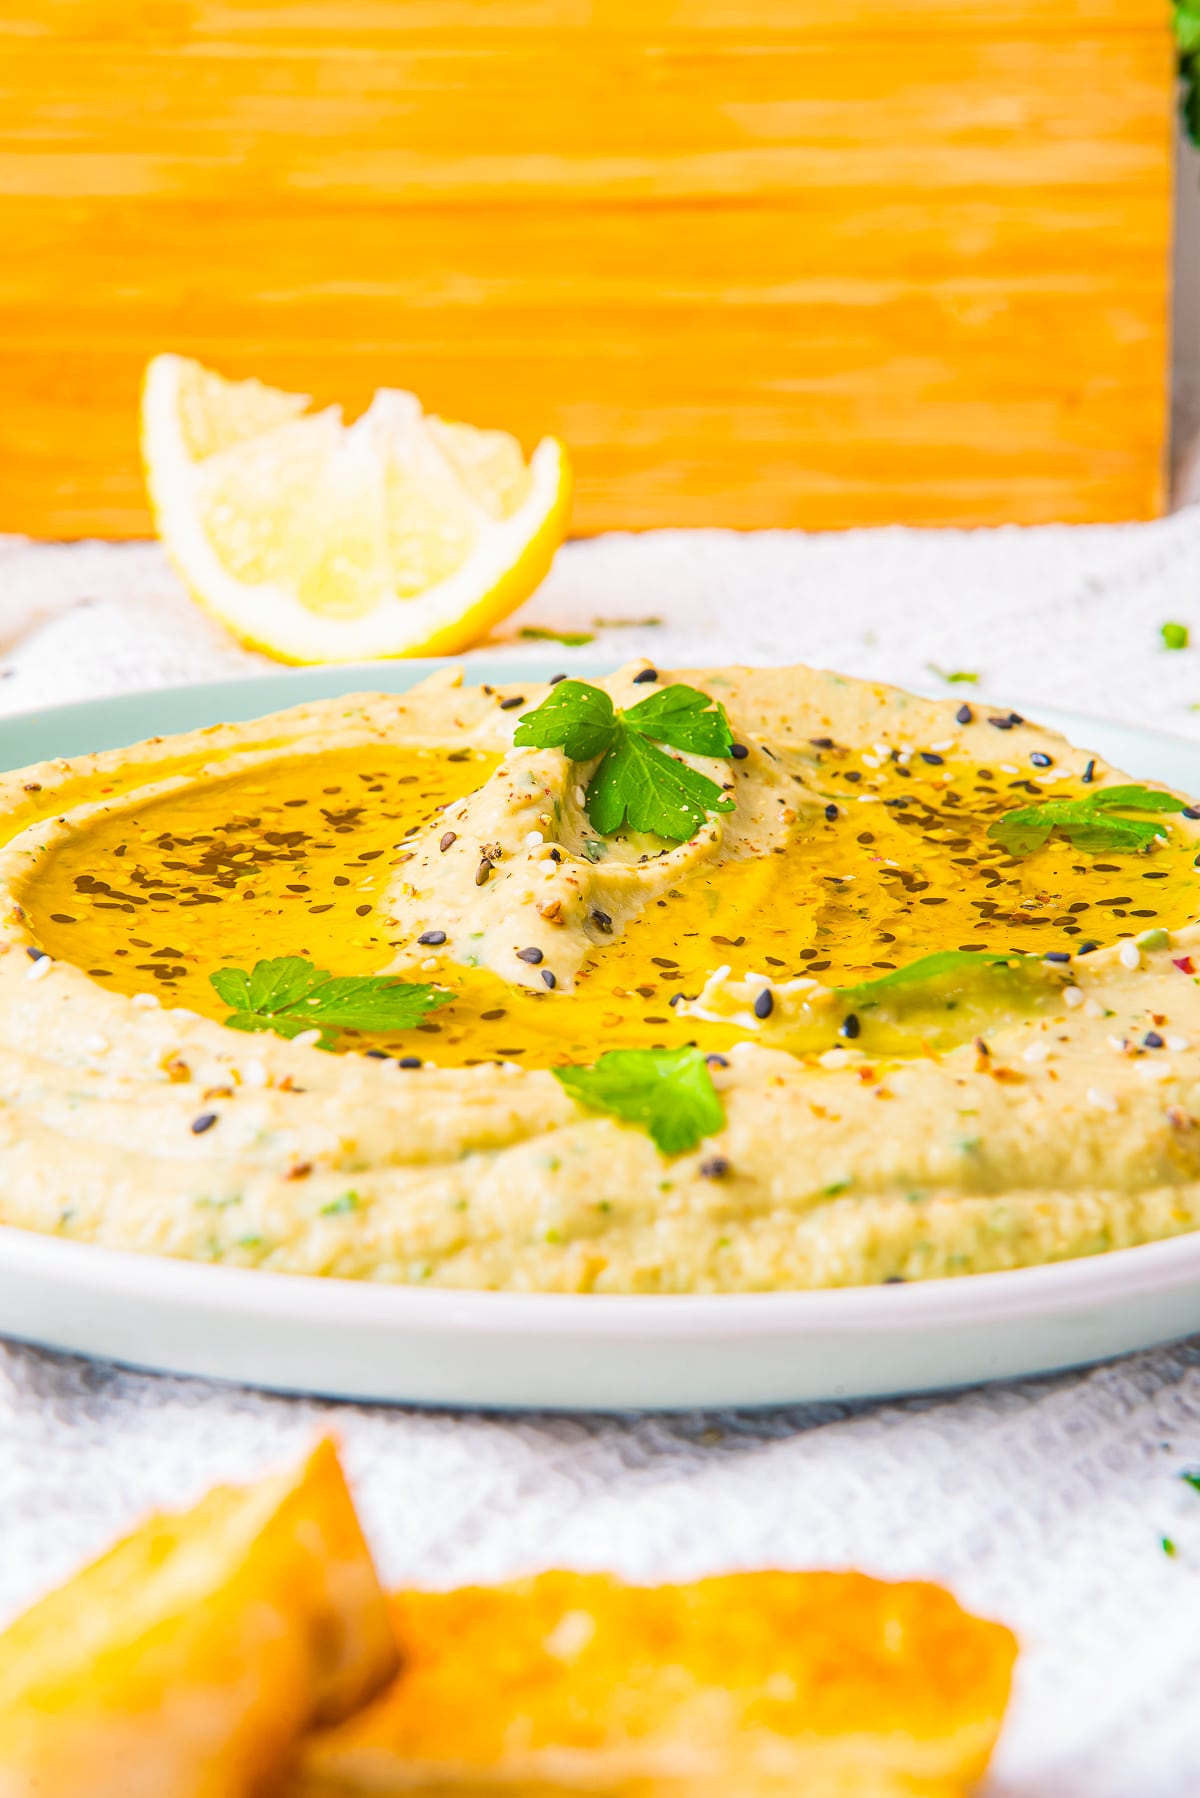 Baba Ganoush Recipe served with olive oil and garnishes on a green plate